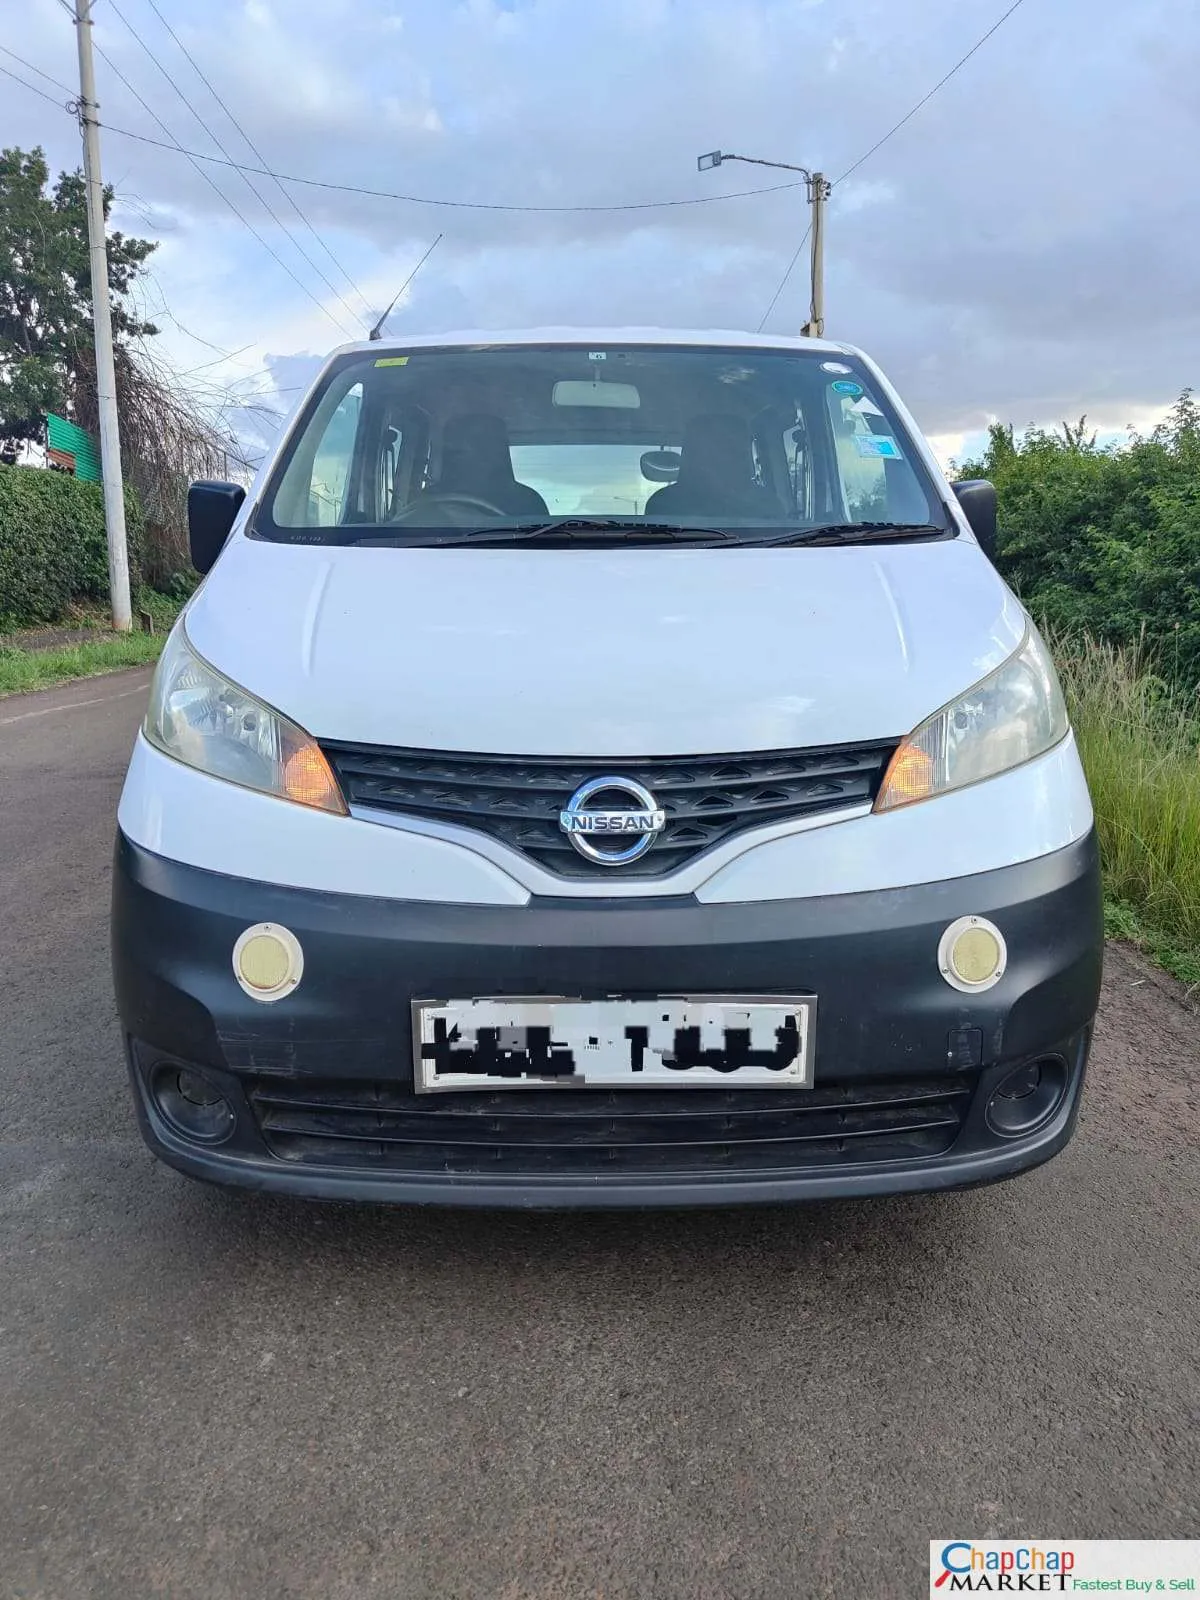 Nissan NV200 Van QUICK SALE NV 200 You Pay 30% Deposit Trade in Ok Exclusive hire purchase installments